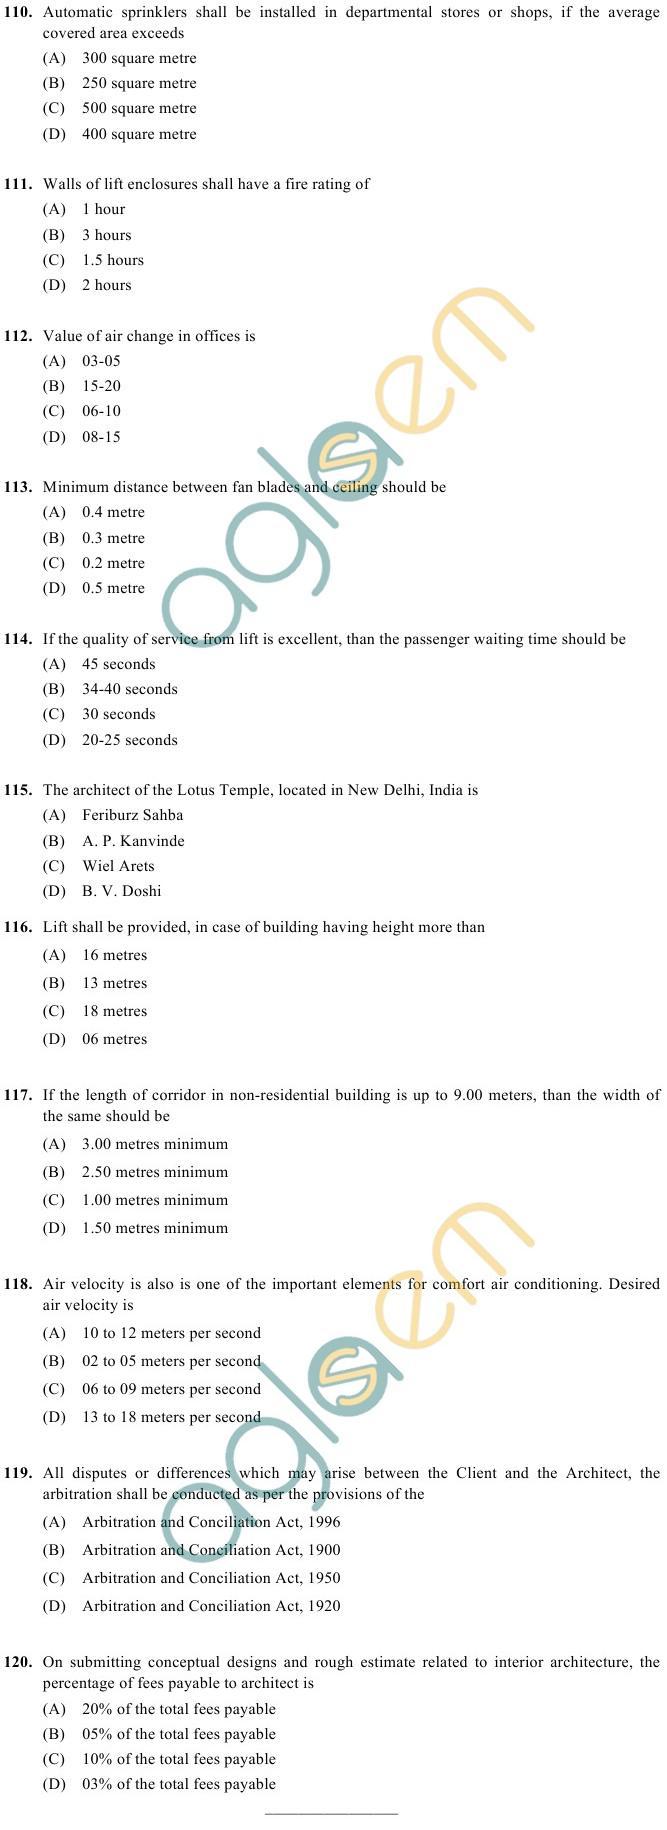 OJEE 2013 Question Paper for PGAT Architecture